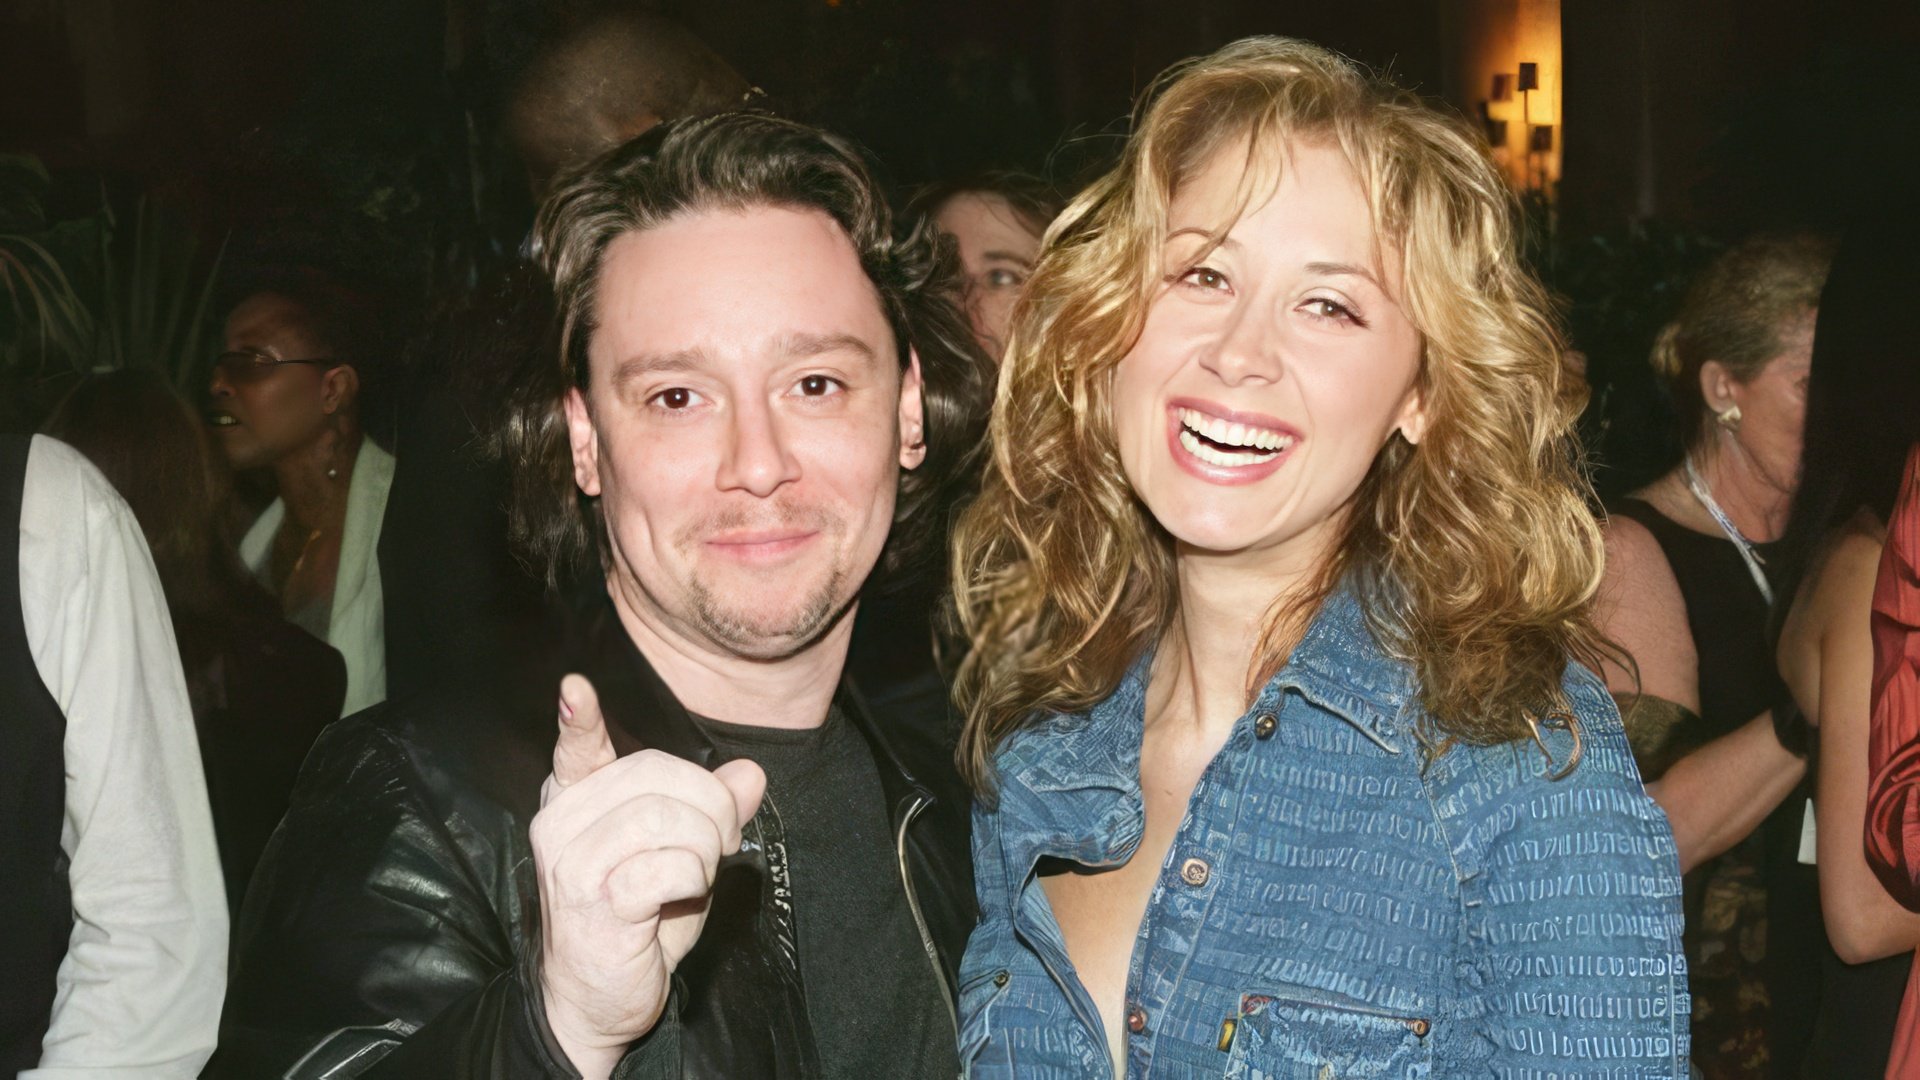 Lara Fabian and Rick Allison were together for 6 years